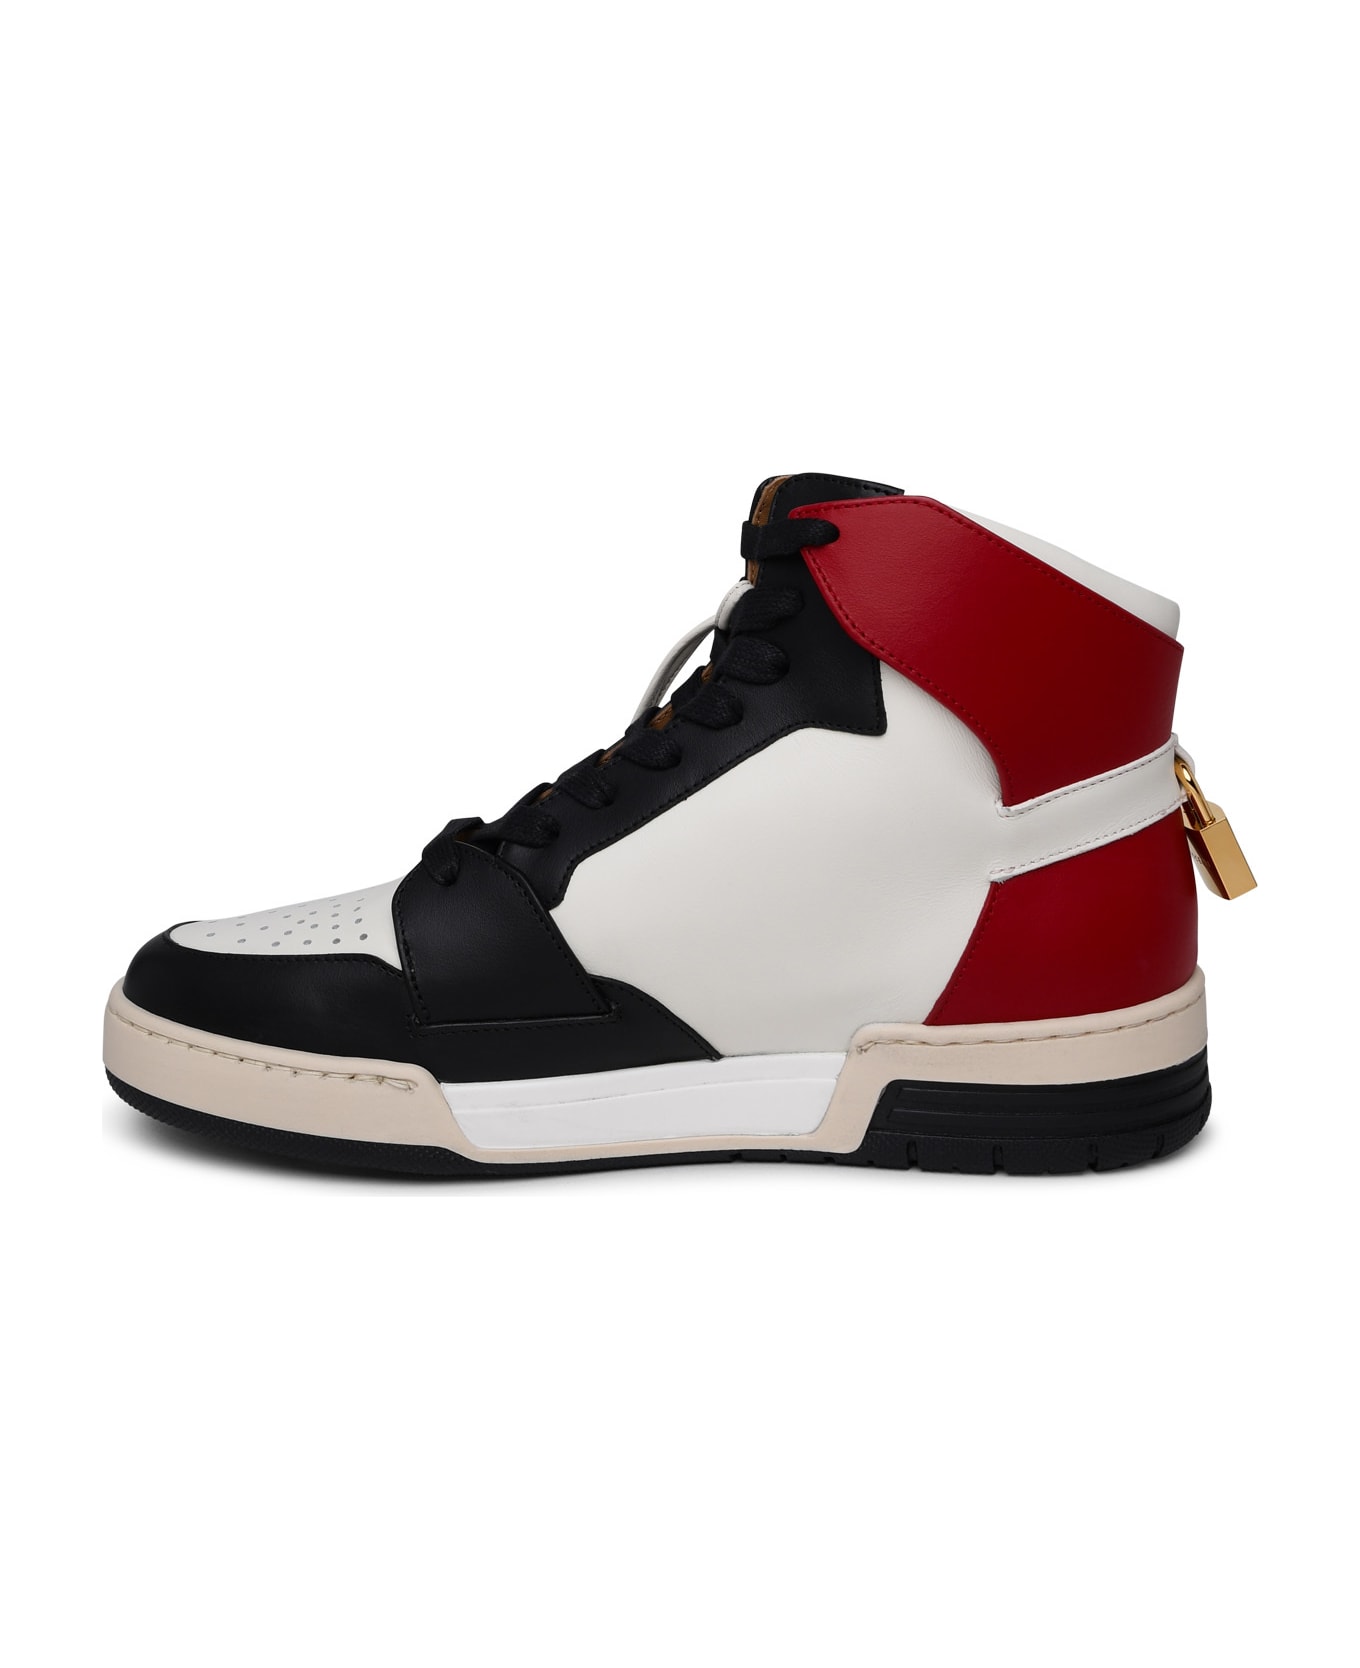 Buscemi 'air Jon' Red And White Leather Sneakers - White スニーカー